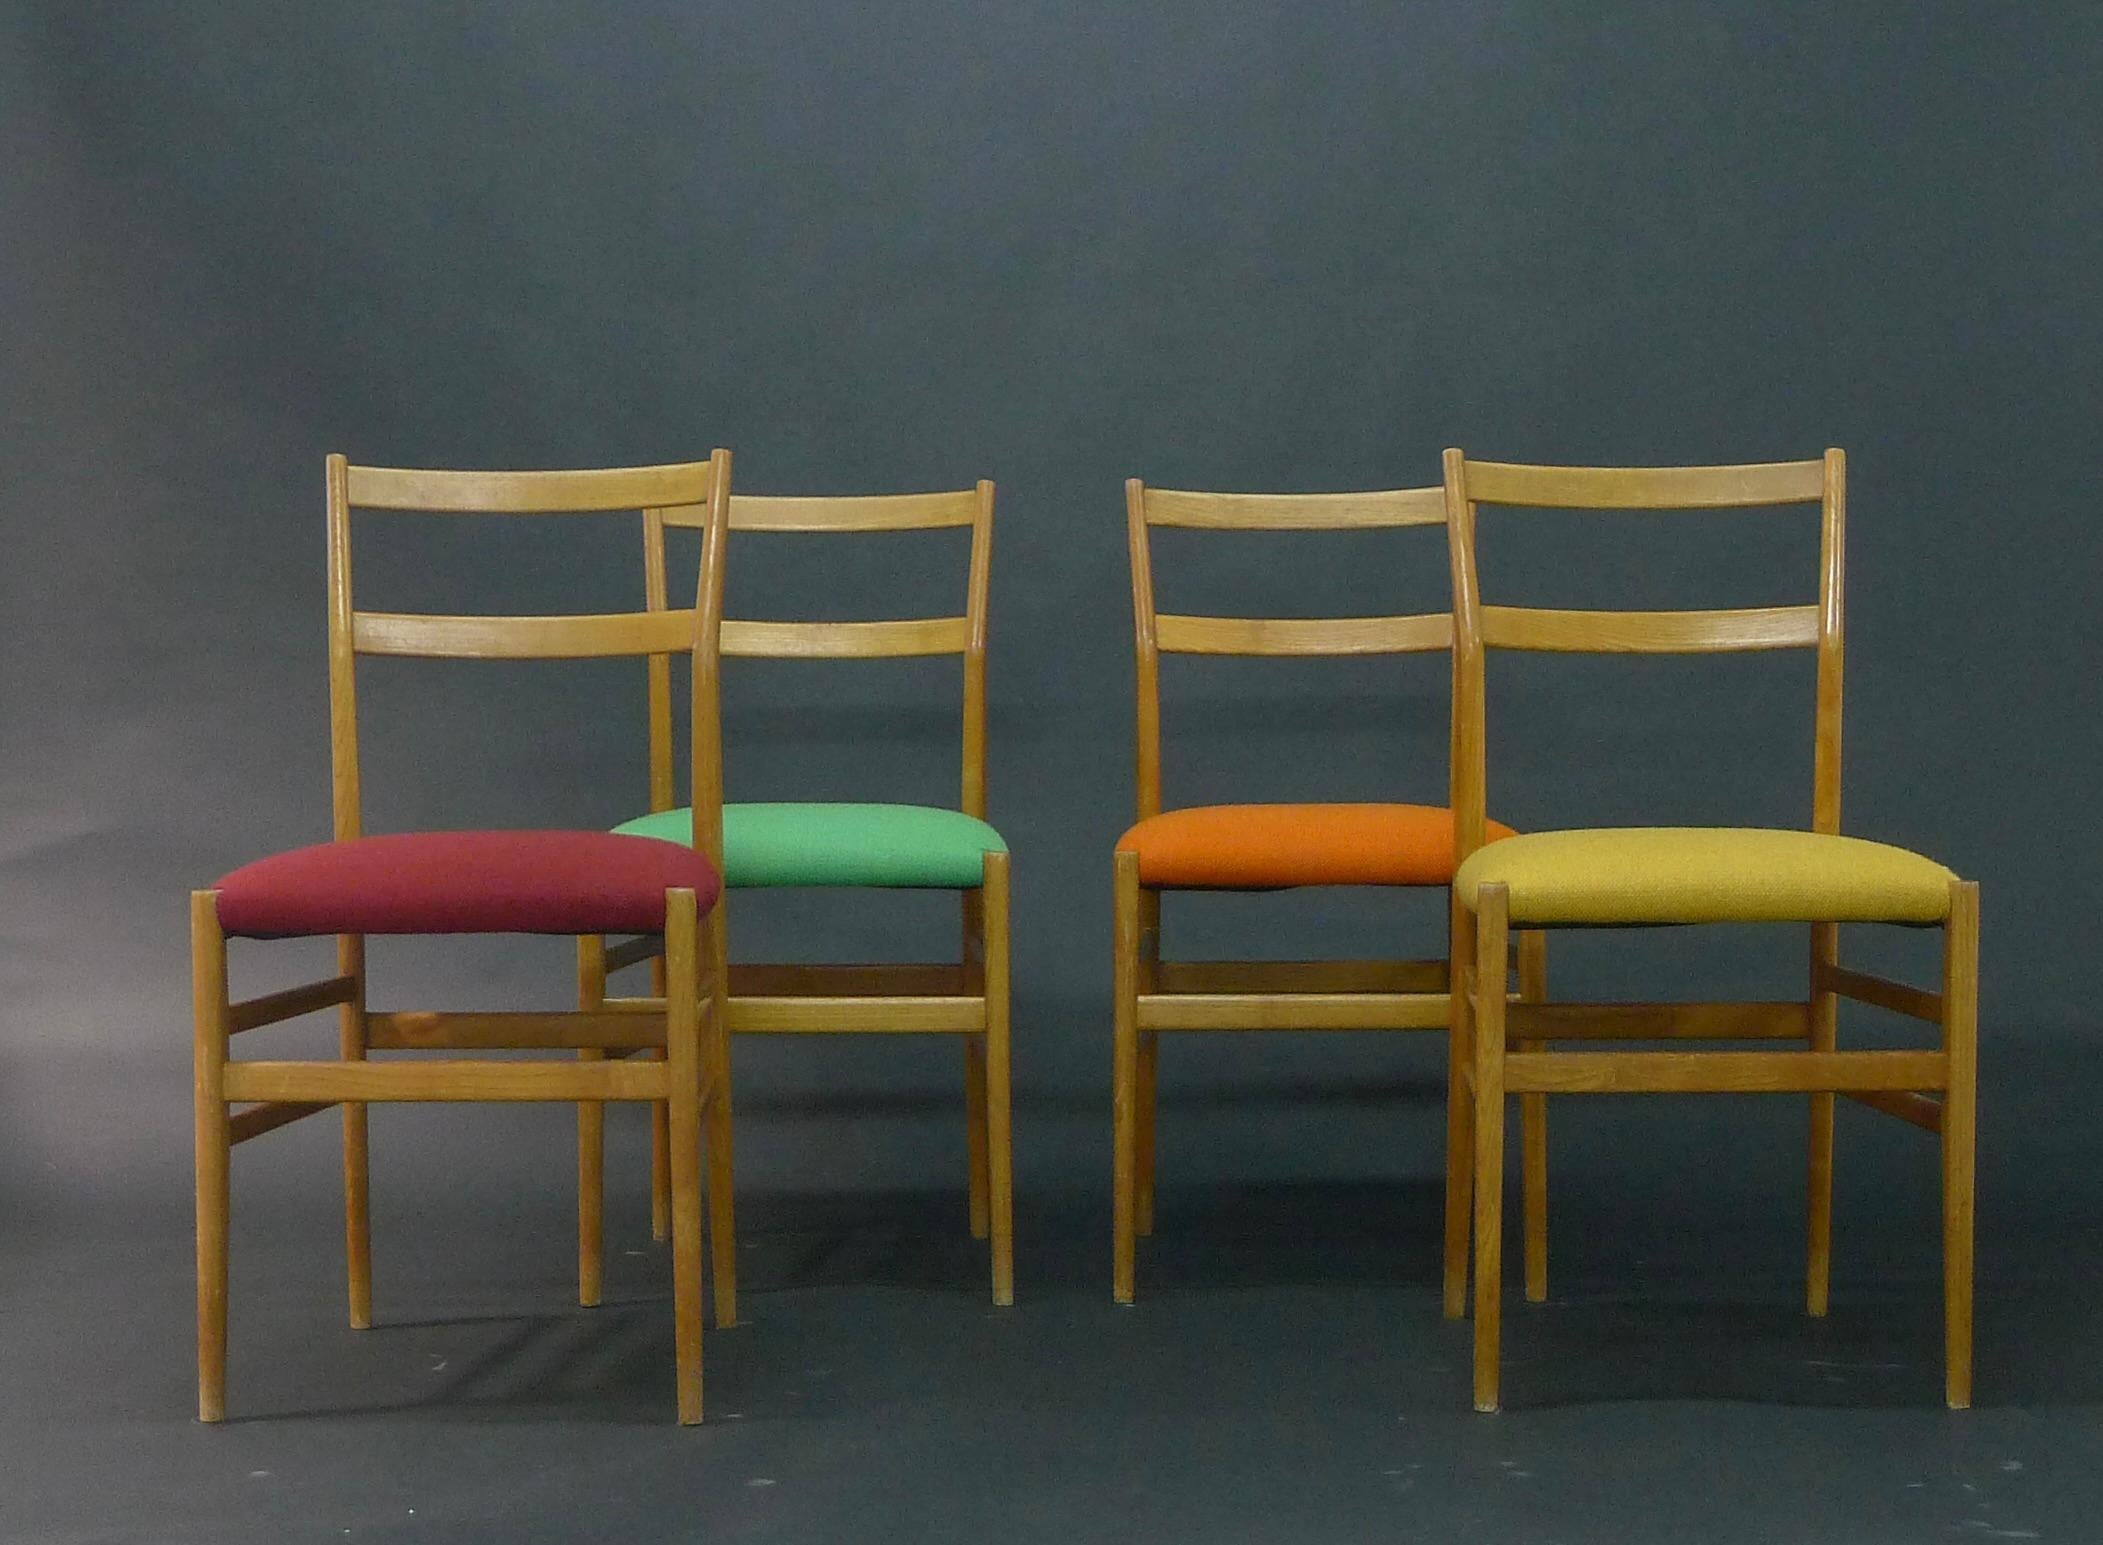 Gio Ponti for Cassina, Harlequin Set of Leggera Chairs, Model 646 in Ash, 1950s For Sale 1